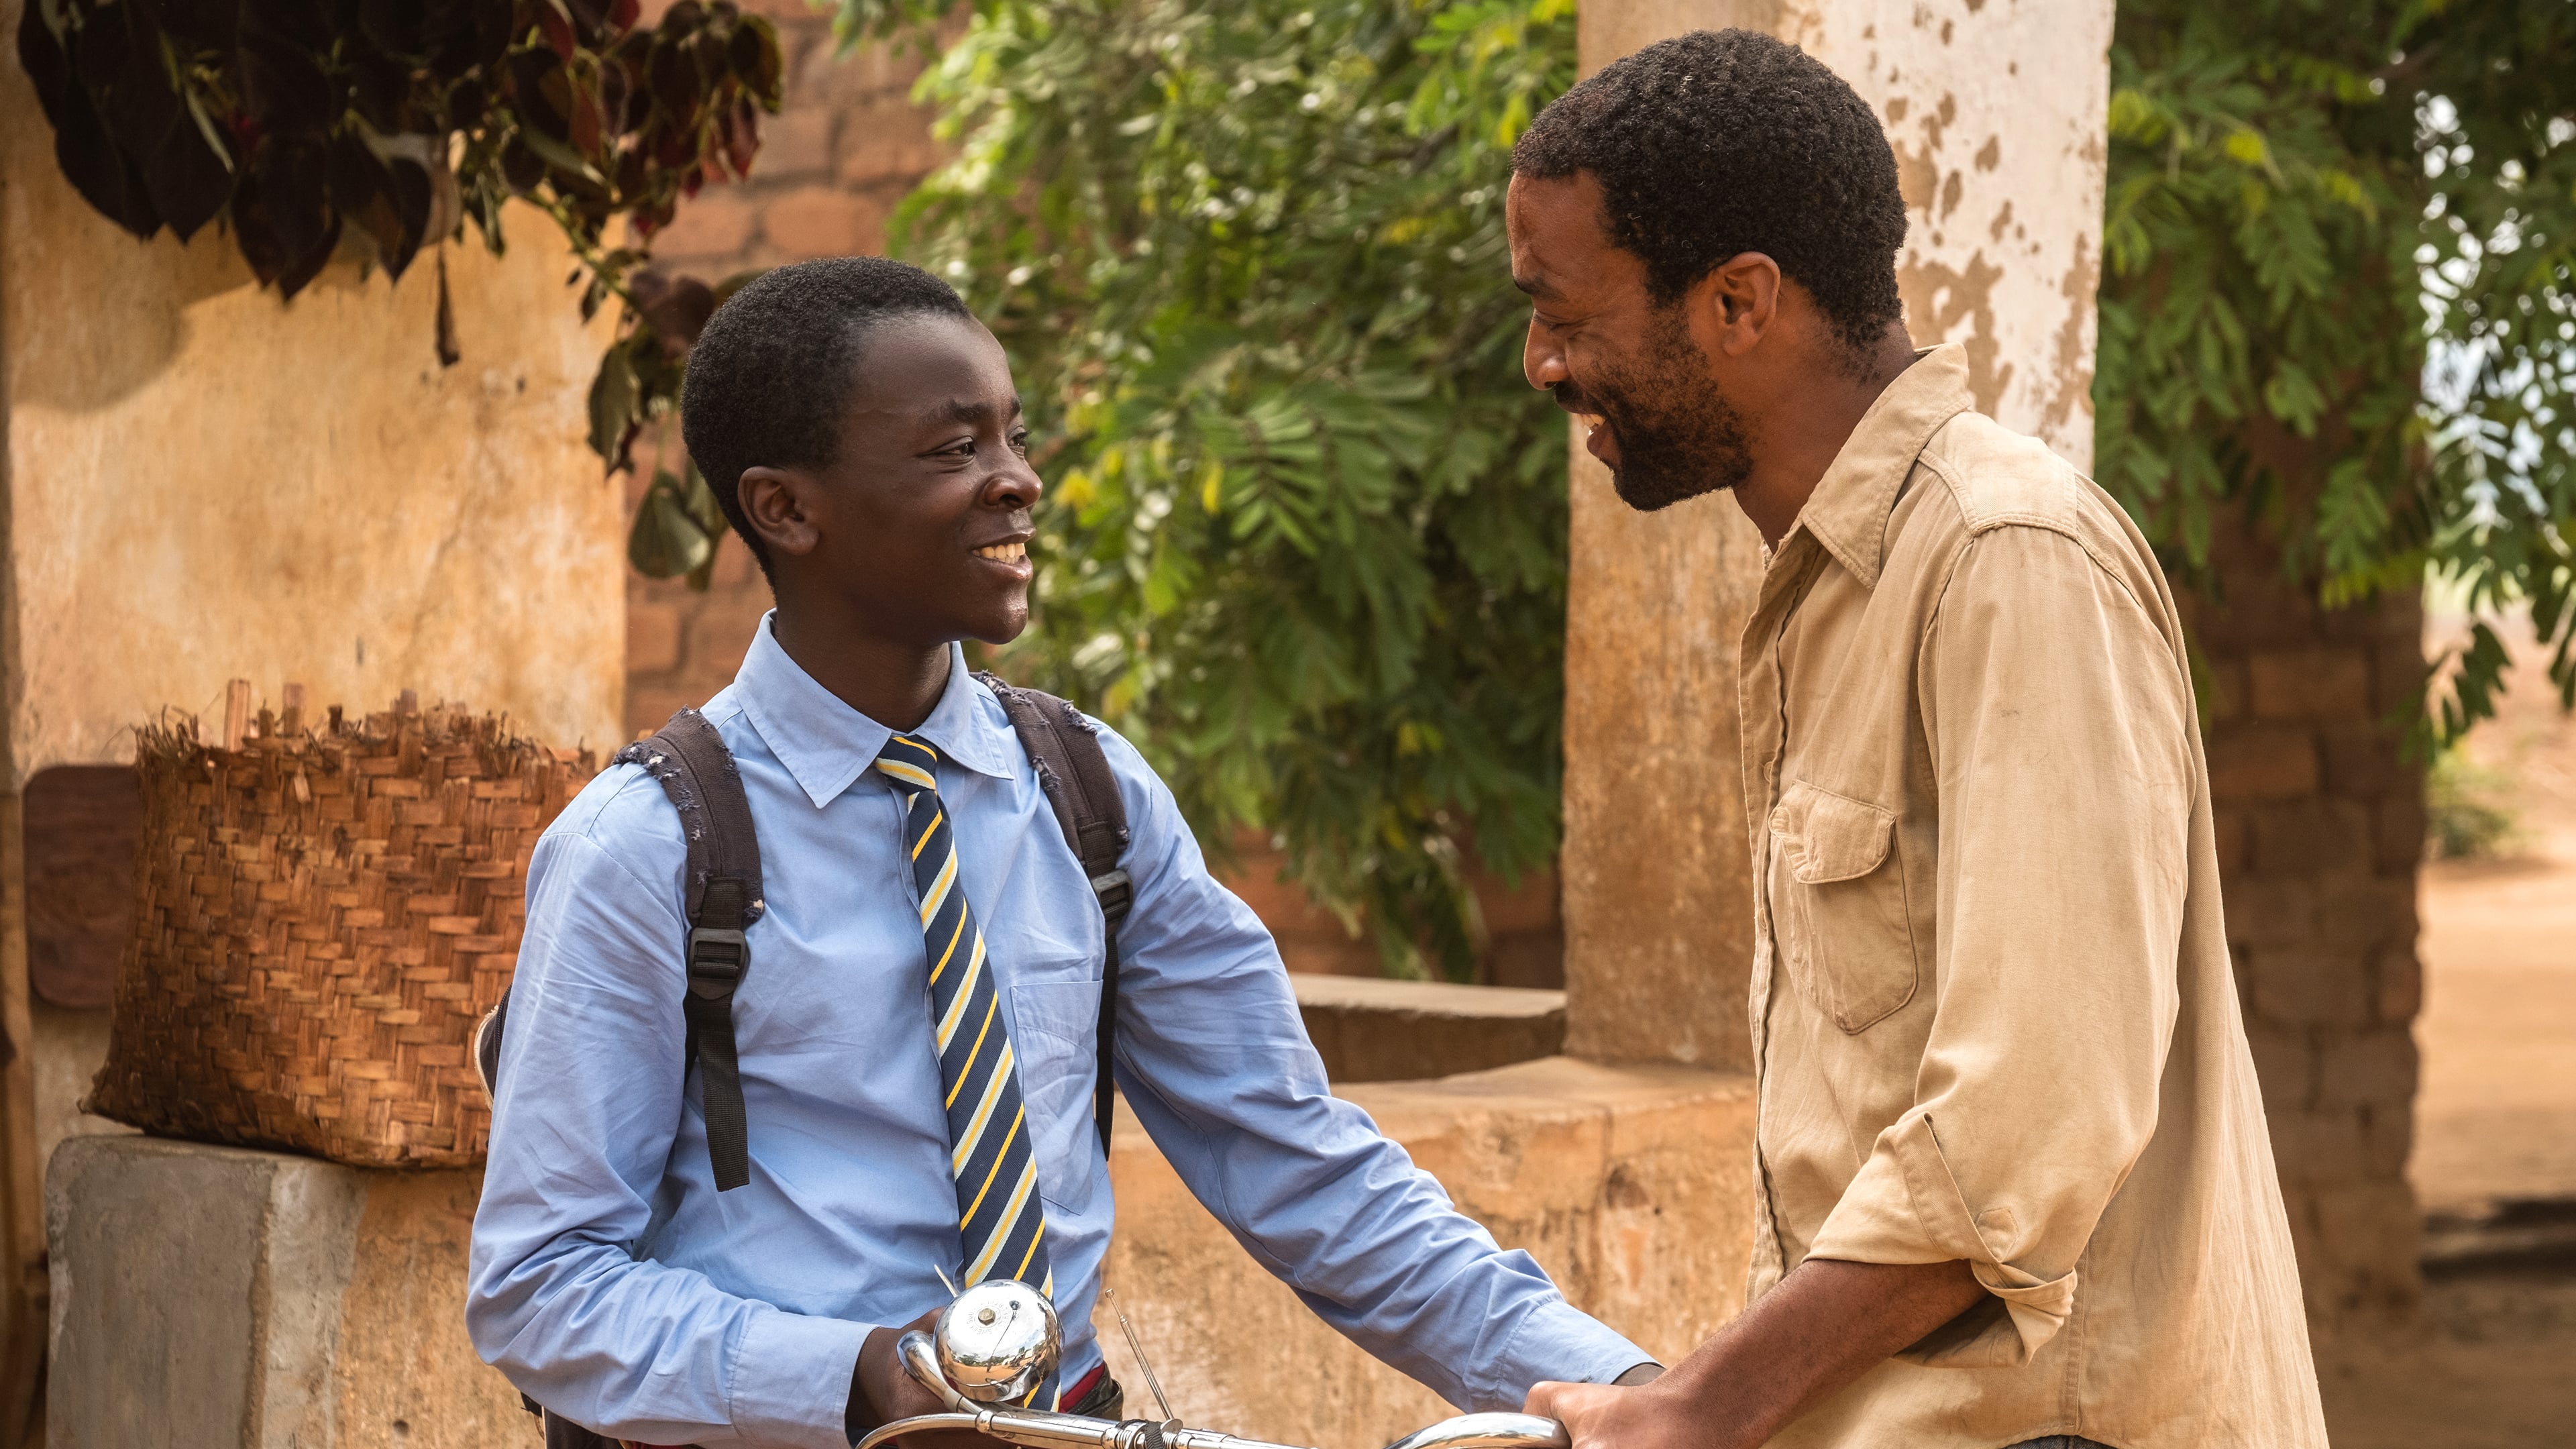 The Boy Who Harnessed the Wind 4k Ultra HD Wallpaper